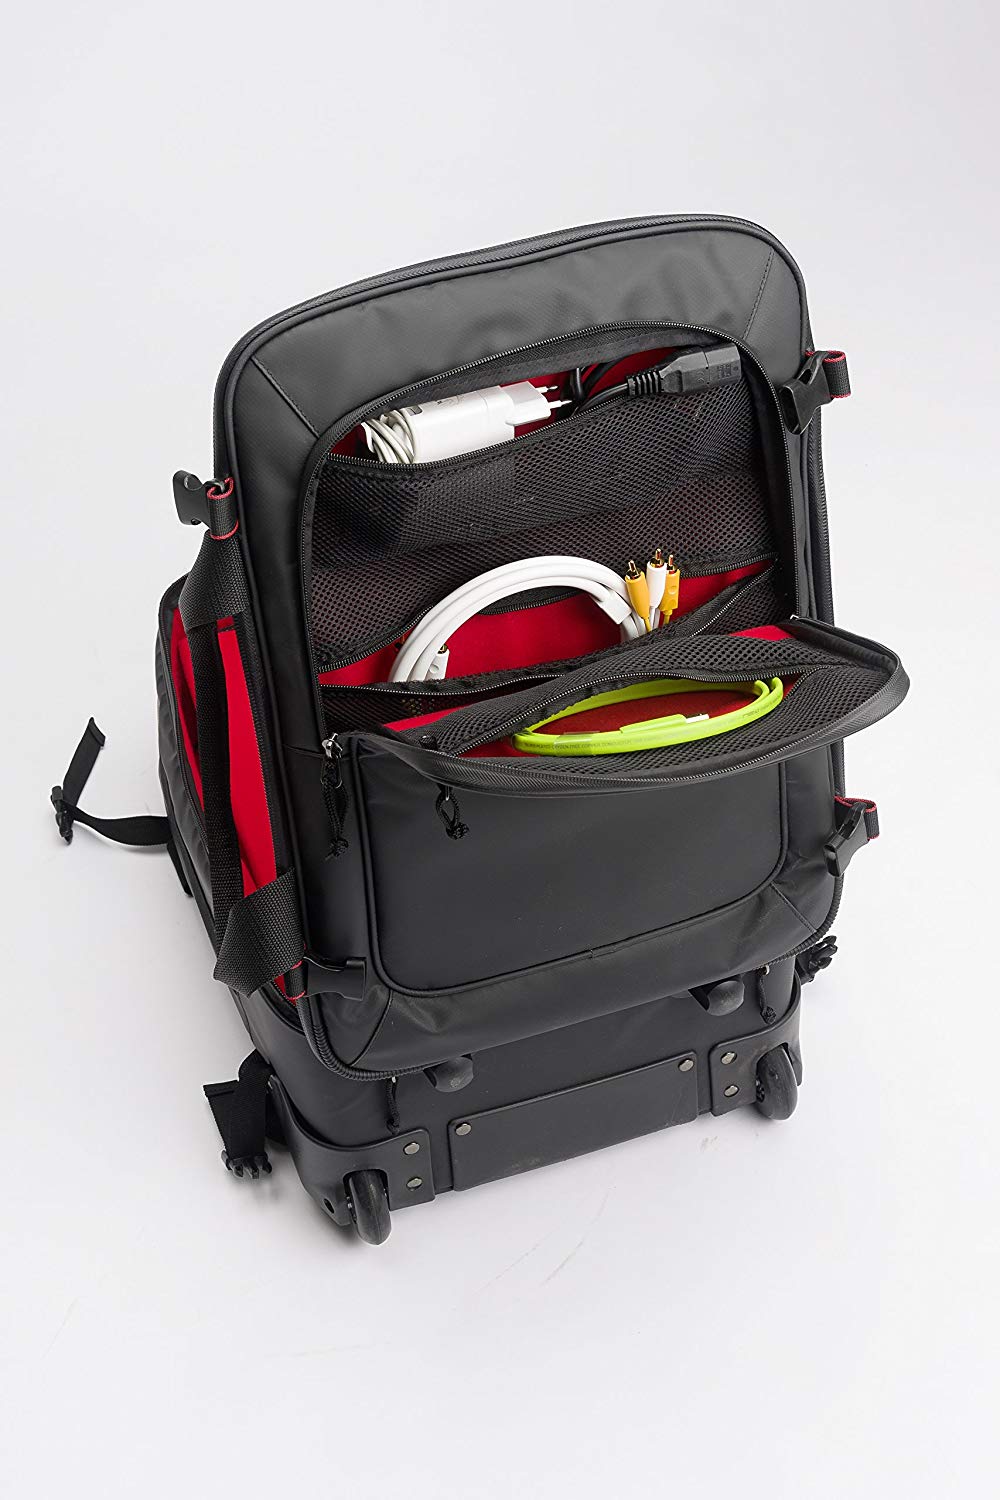 Magma RIOT Carry-On Trolley по цене 26 503.00 ₽